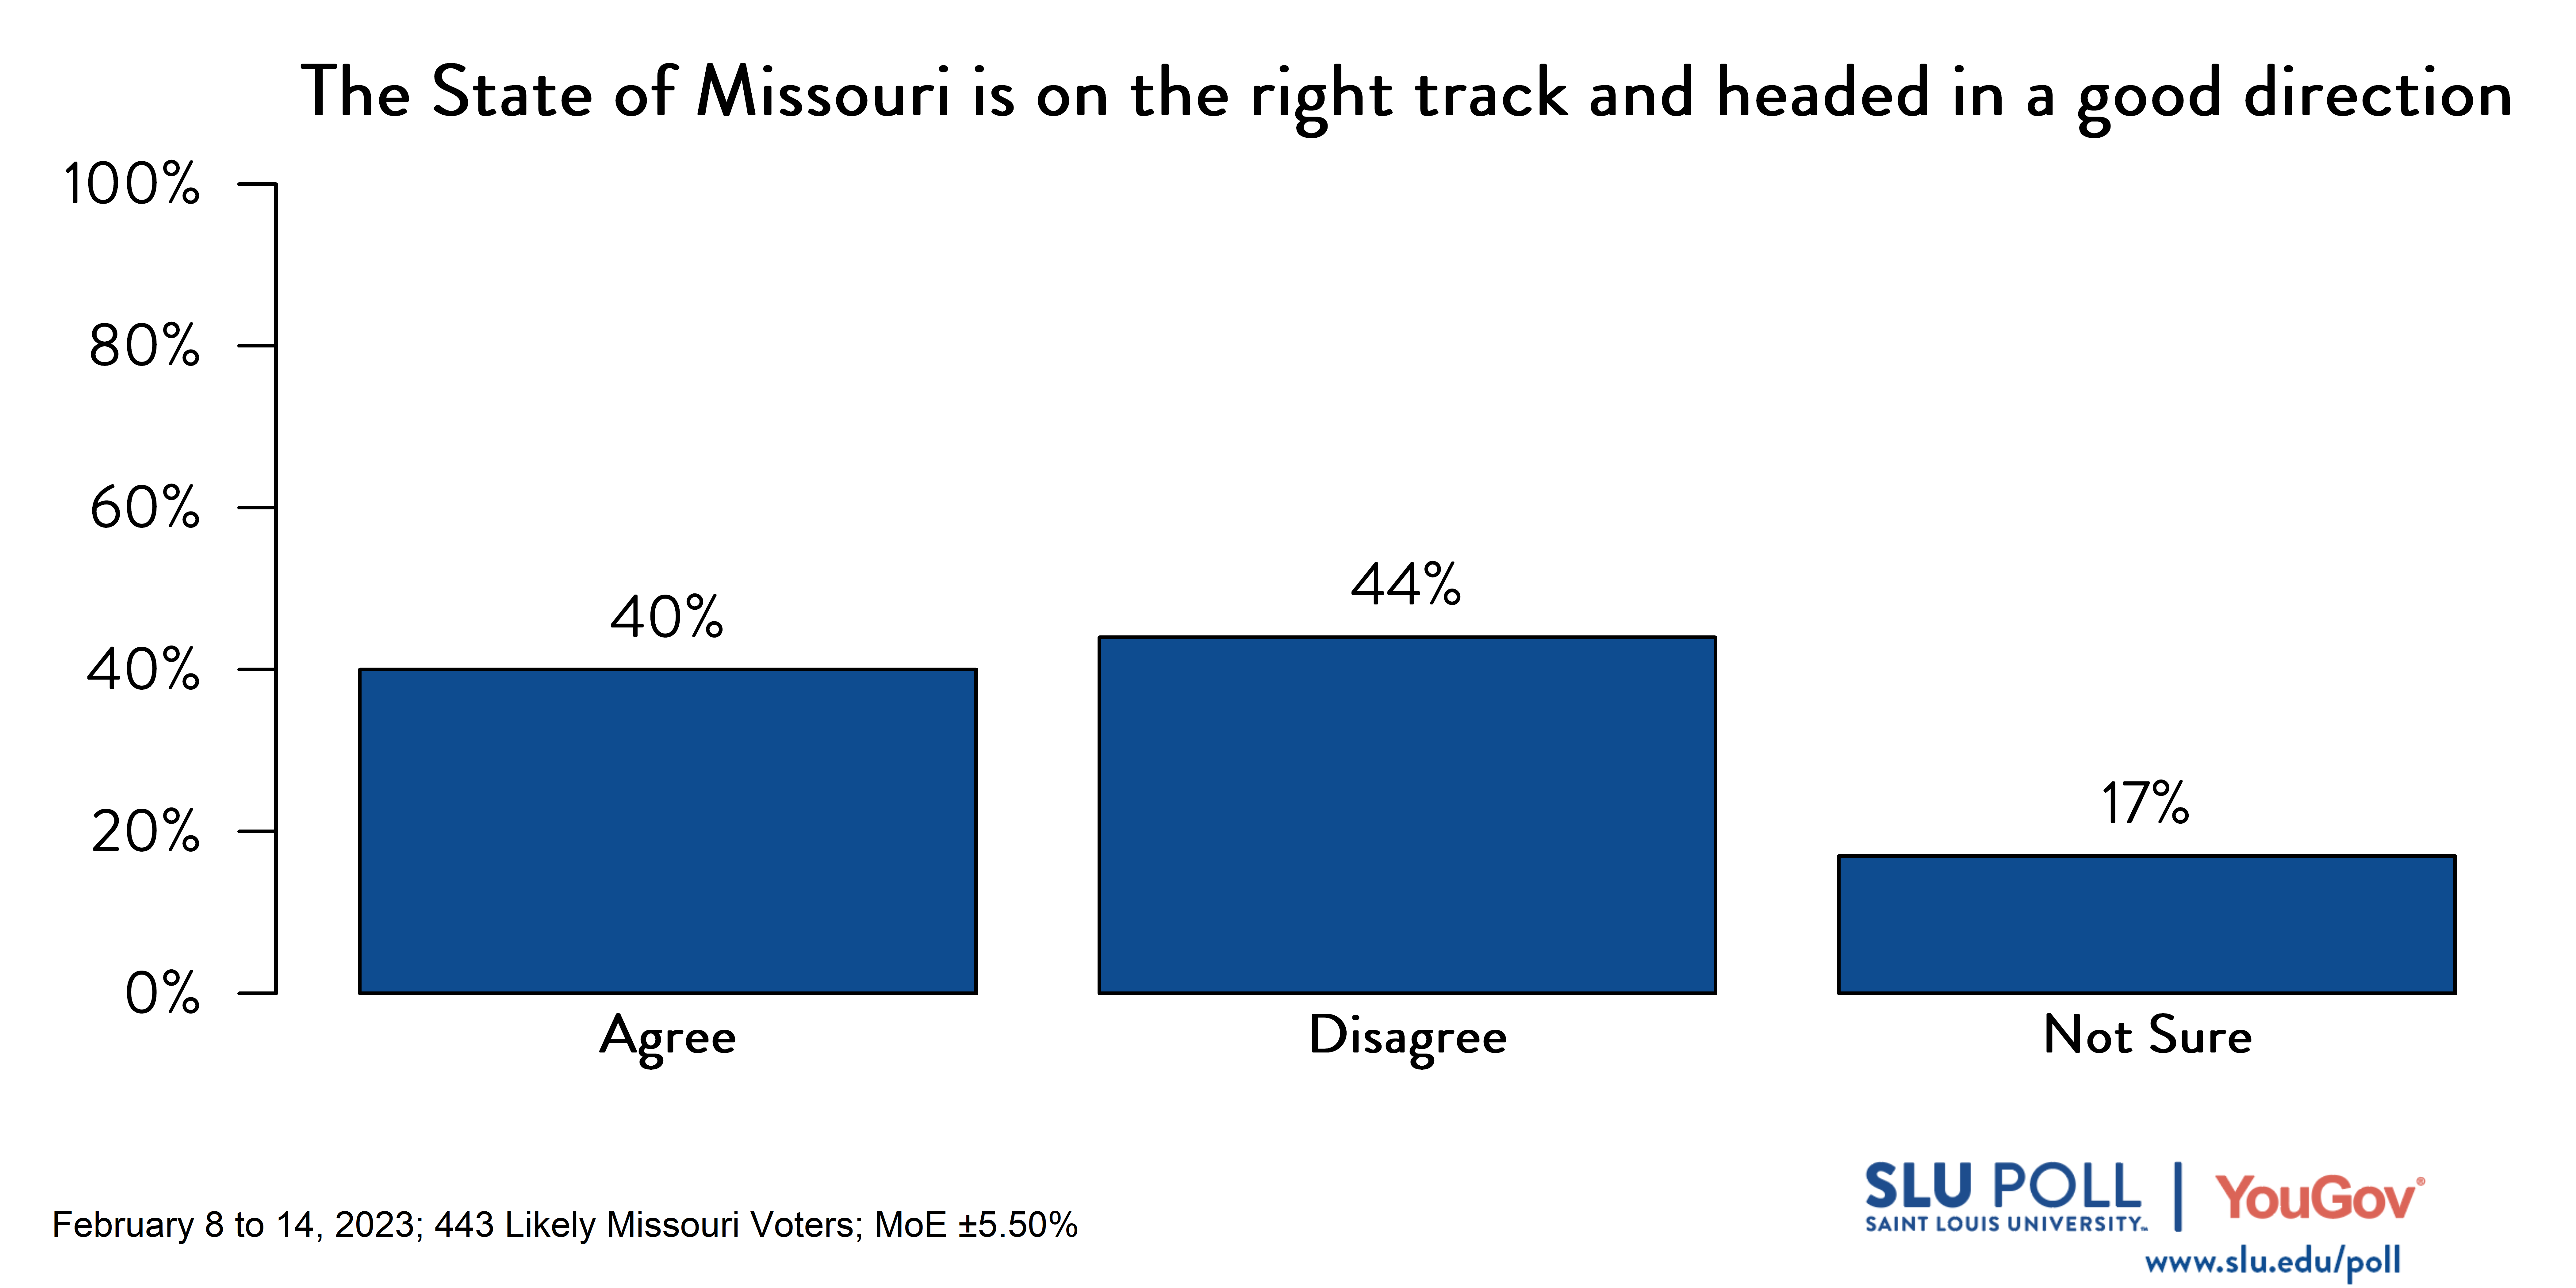 Likely voters' responses to 'Do you agree or disagree with the following statements: The State of Missouri is on the right track and headed in a good direction?': 40% Agree, 44% Disagree, and 17% Not sure.